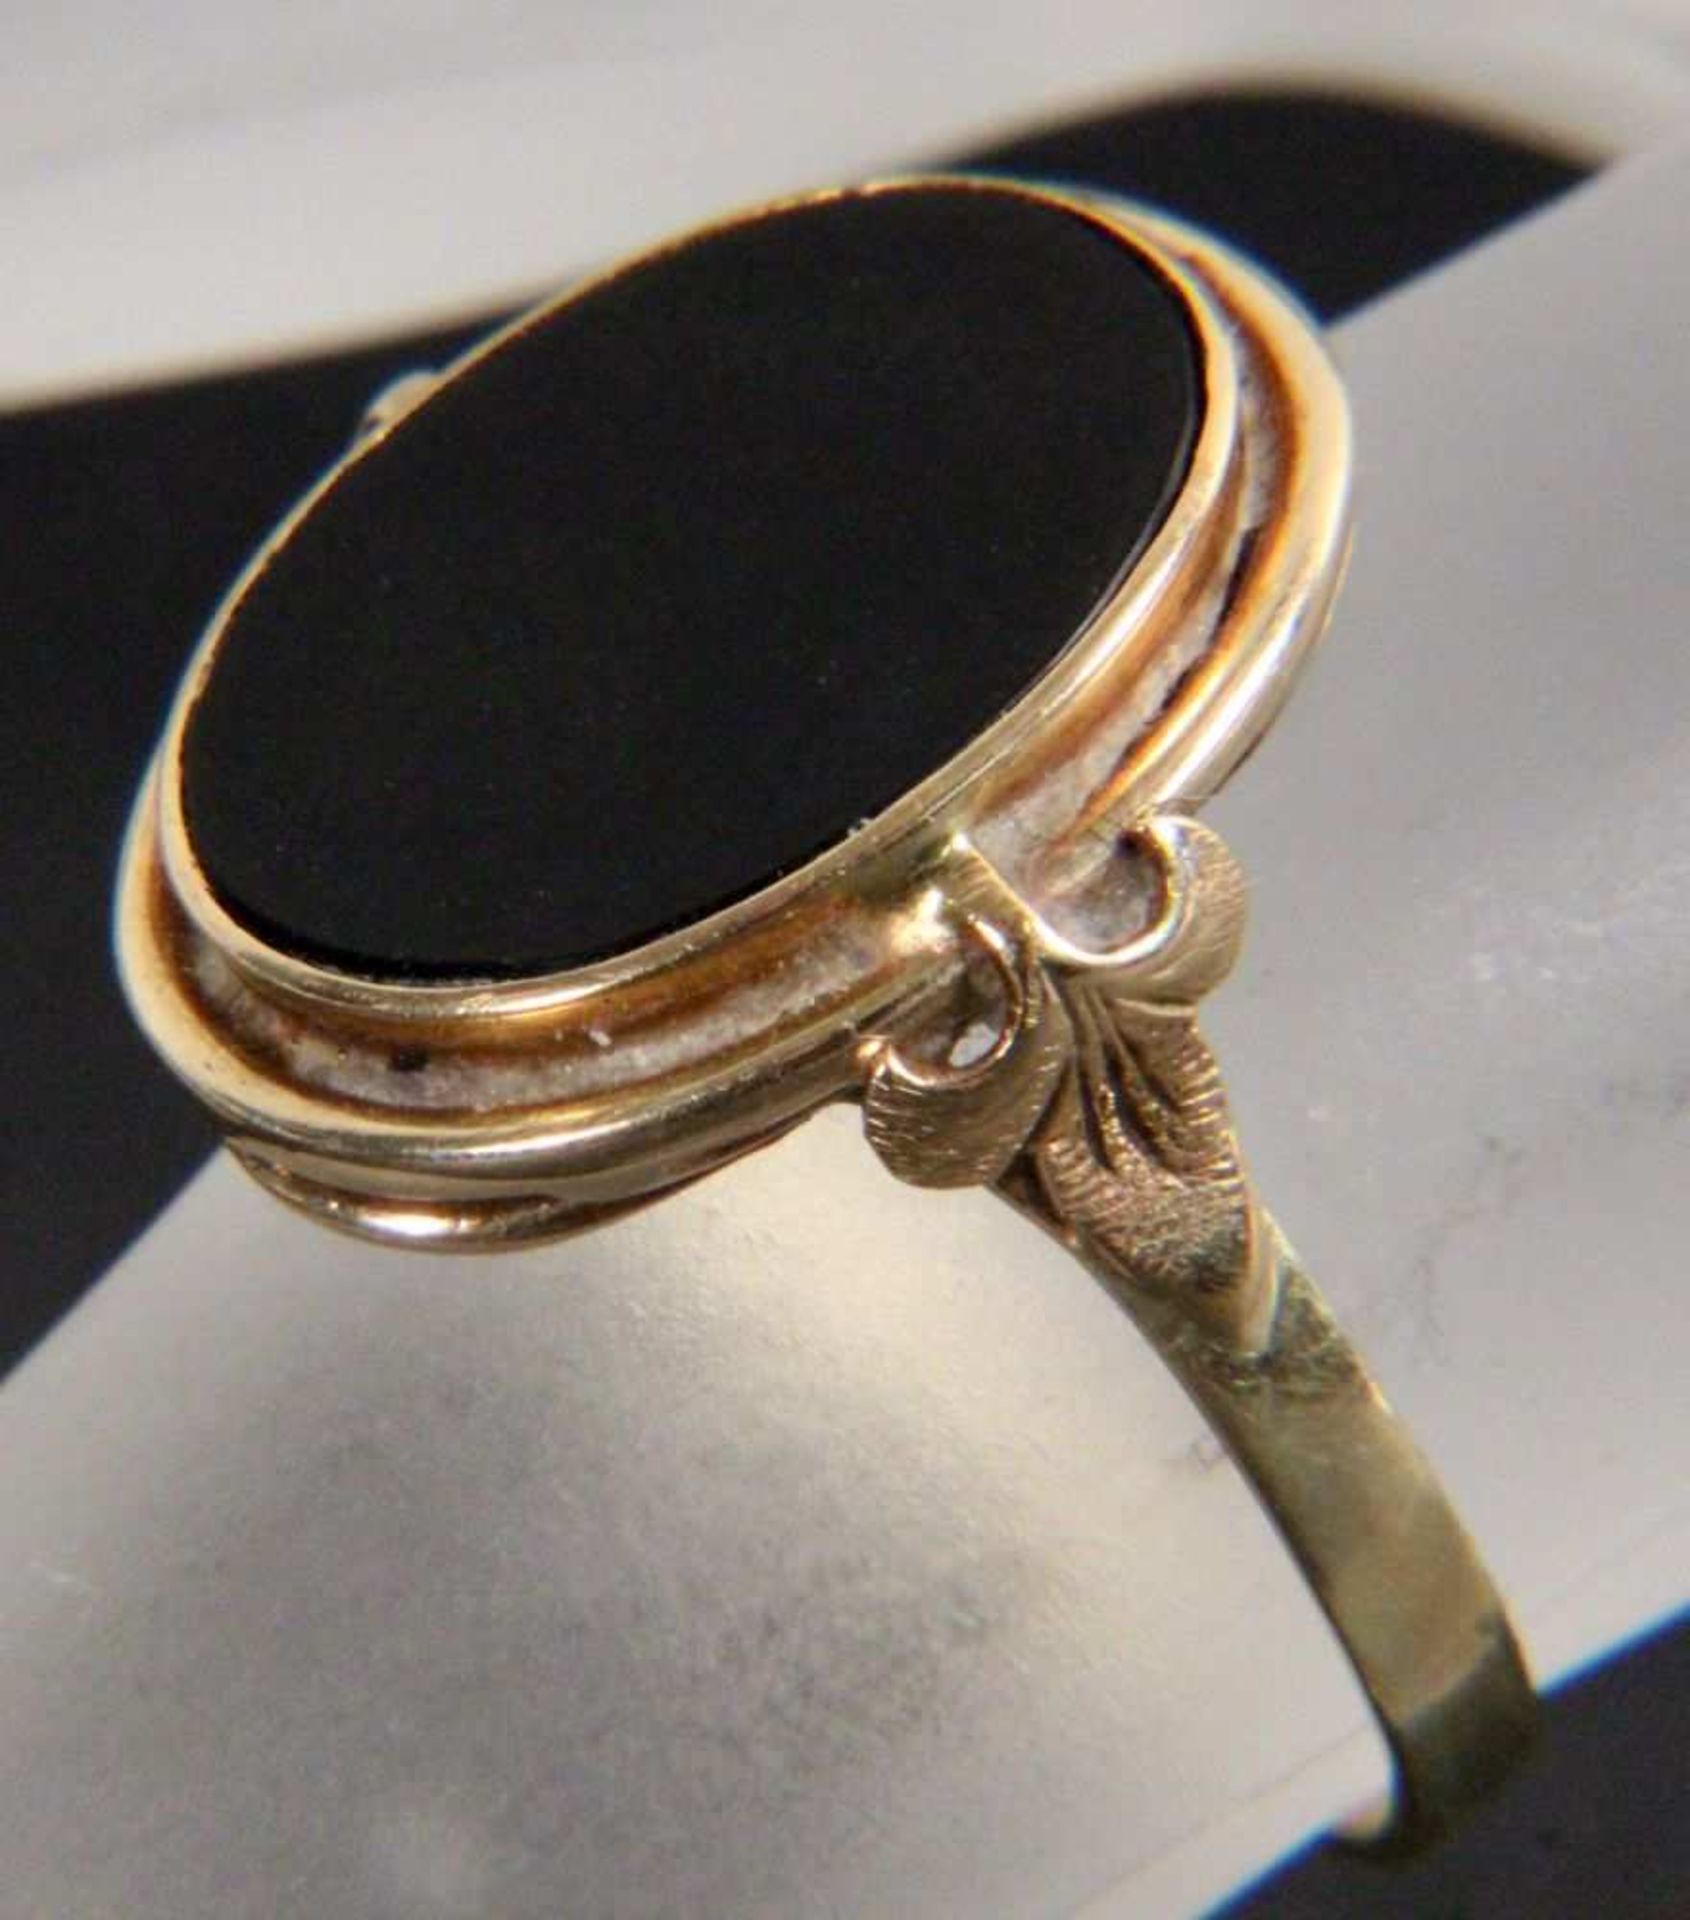 SIEGELRING 585/000 Gelbgold mit neutraler Onyxplatte. Ringgr. 54, brutto ca. 4,05g A SEAL RING 585/